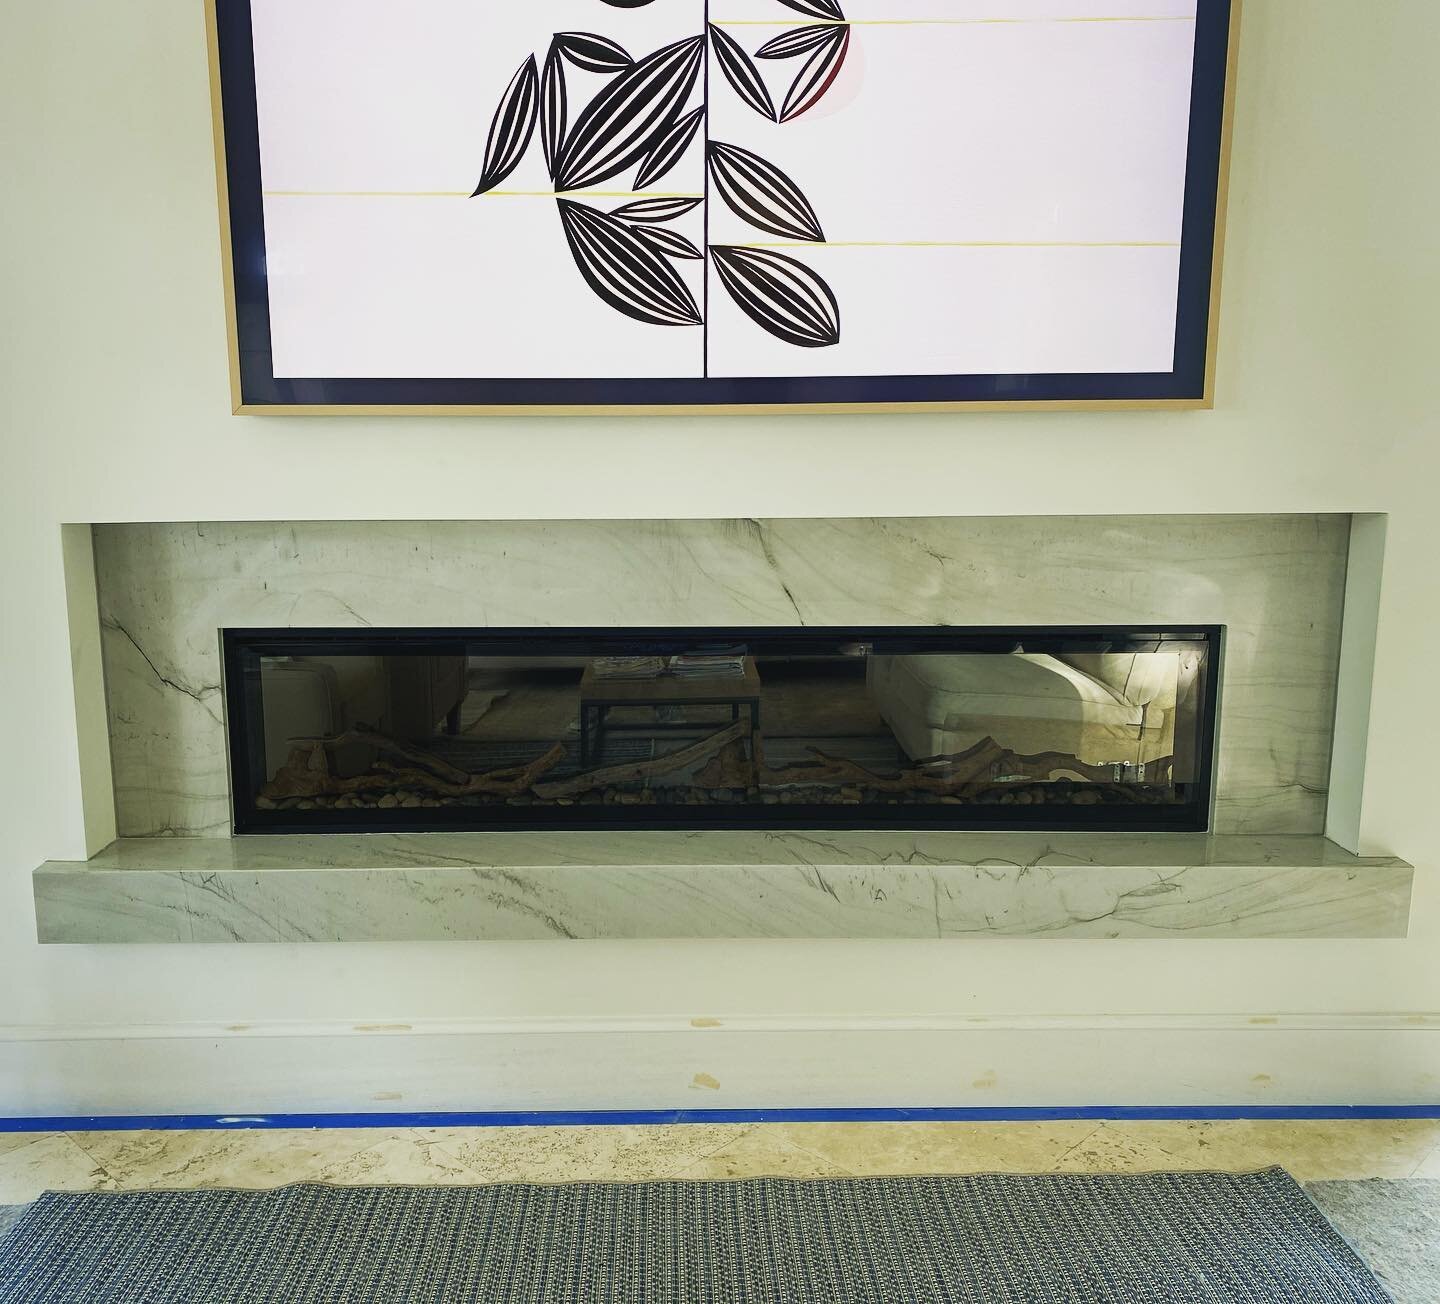 Beautiful Quartzite done in this Fireplace ✅✅ #quartzite #countertops #natural #naturalstone #stone #work #fireplace #remodel #homeremodeling #modern